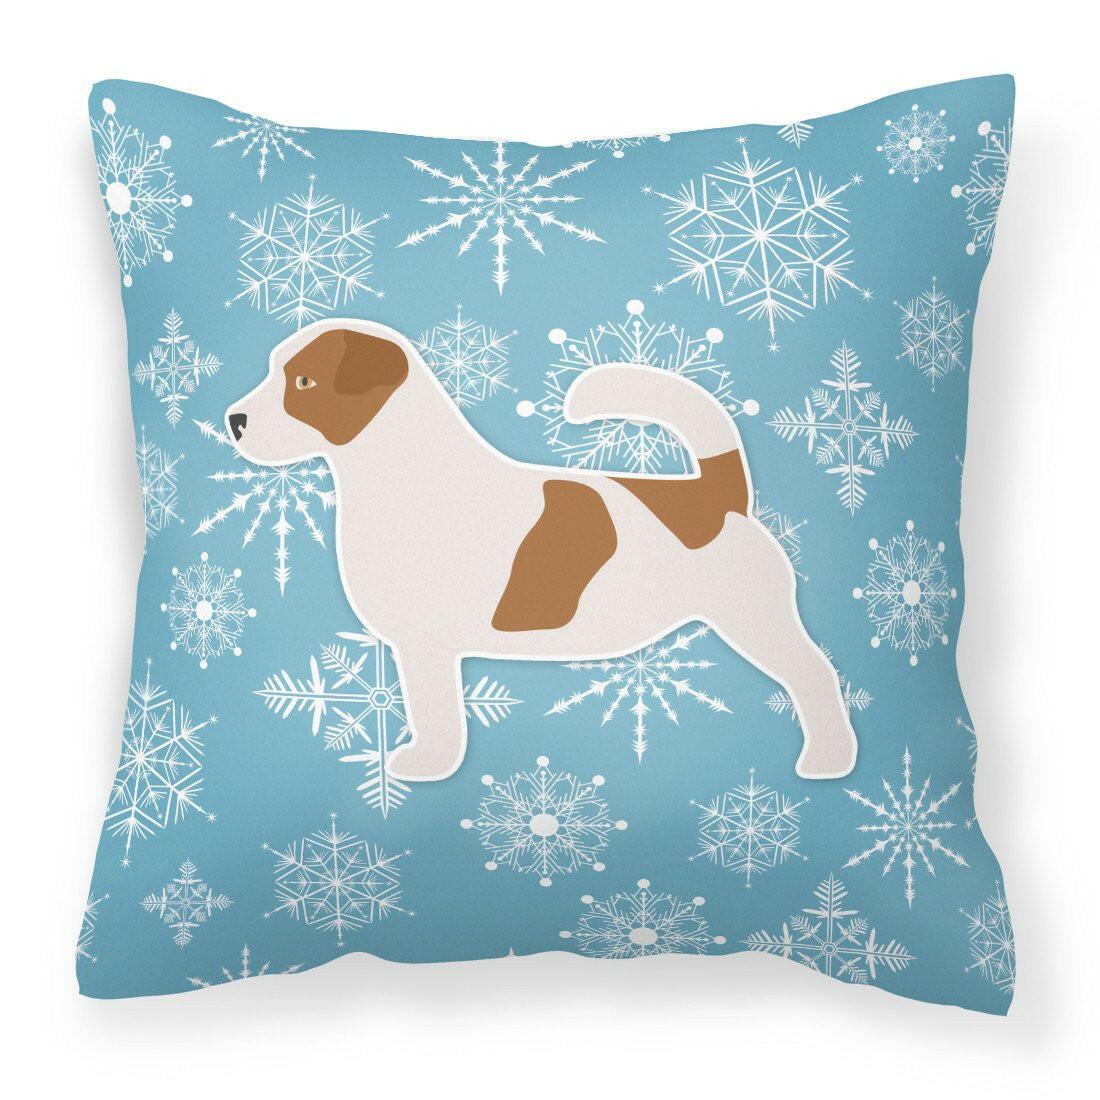 Winter Snowflake Jack Russell Terrier Fabric Decorative Pillow BB3507PW1818 by Caroline's Treasures